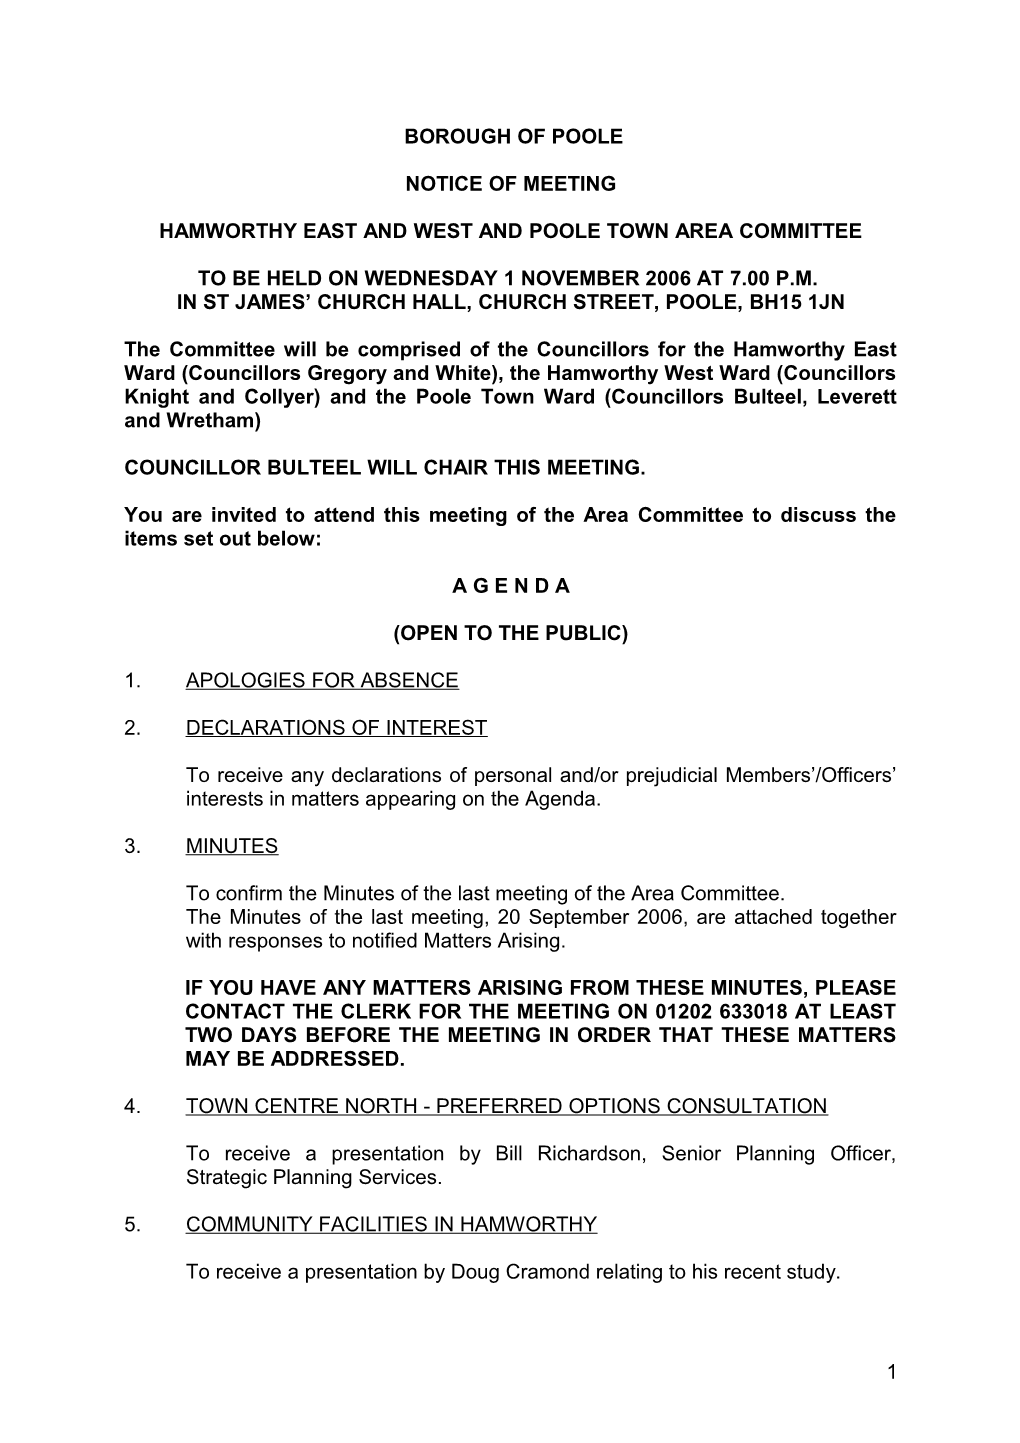 Agenda - Hamworthy East and West and Poole Town Area Committee - 1 November 2006